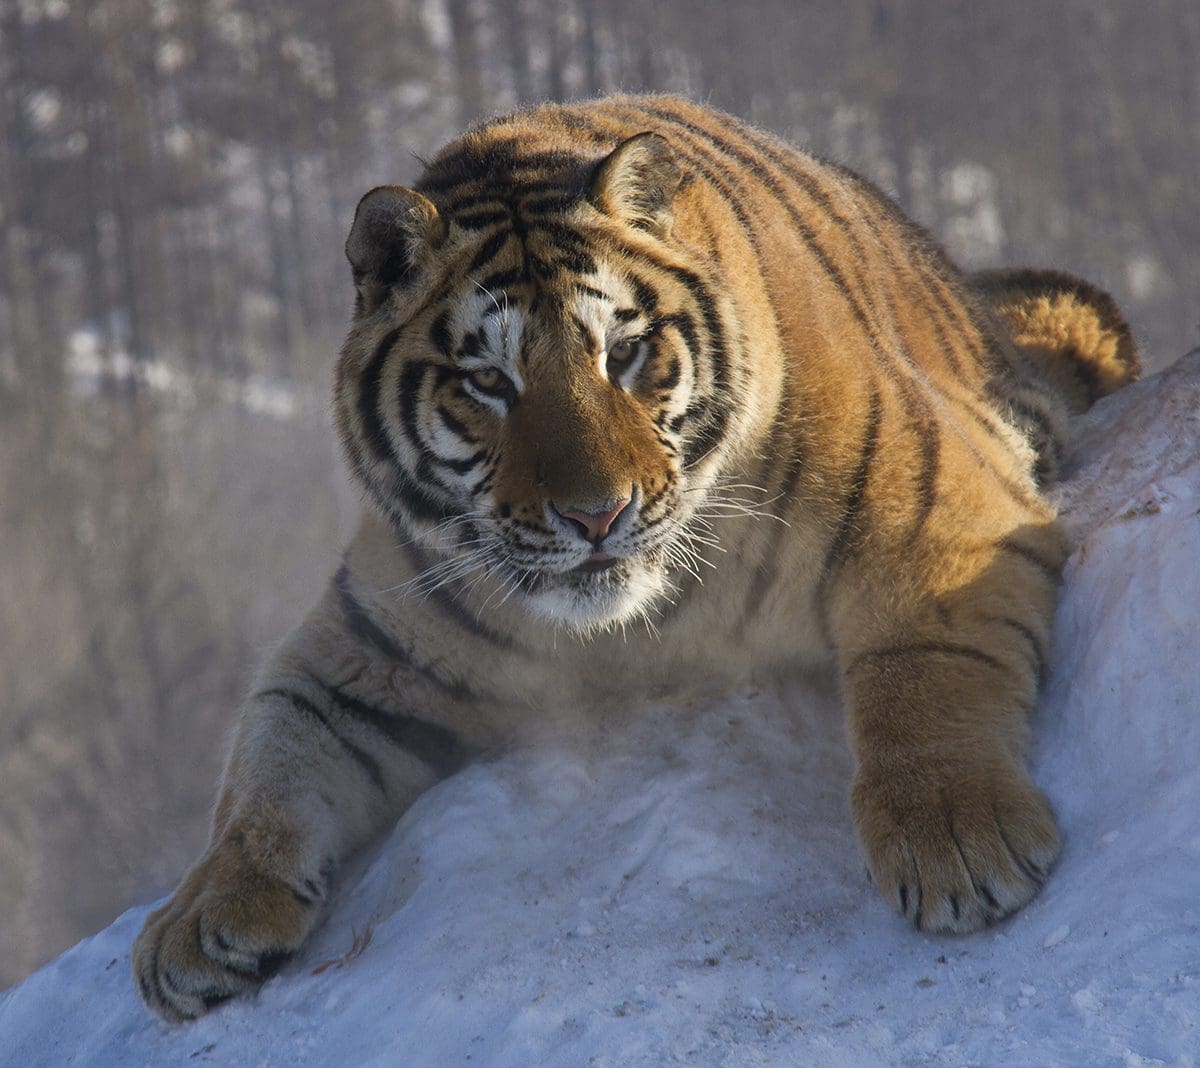 A tiger is sitting on top of a snowy hill.